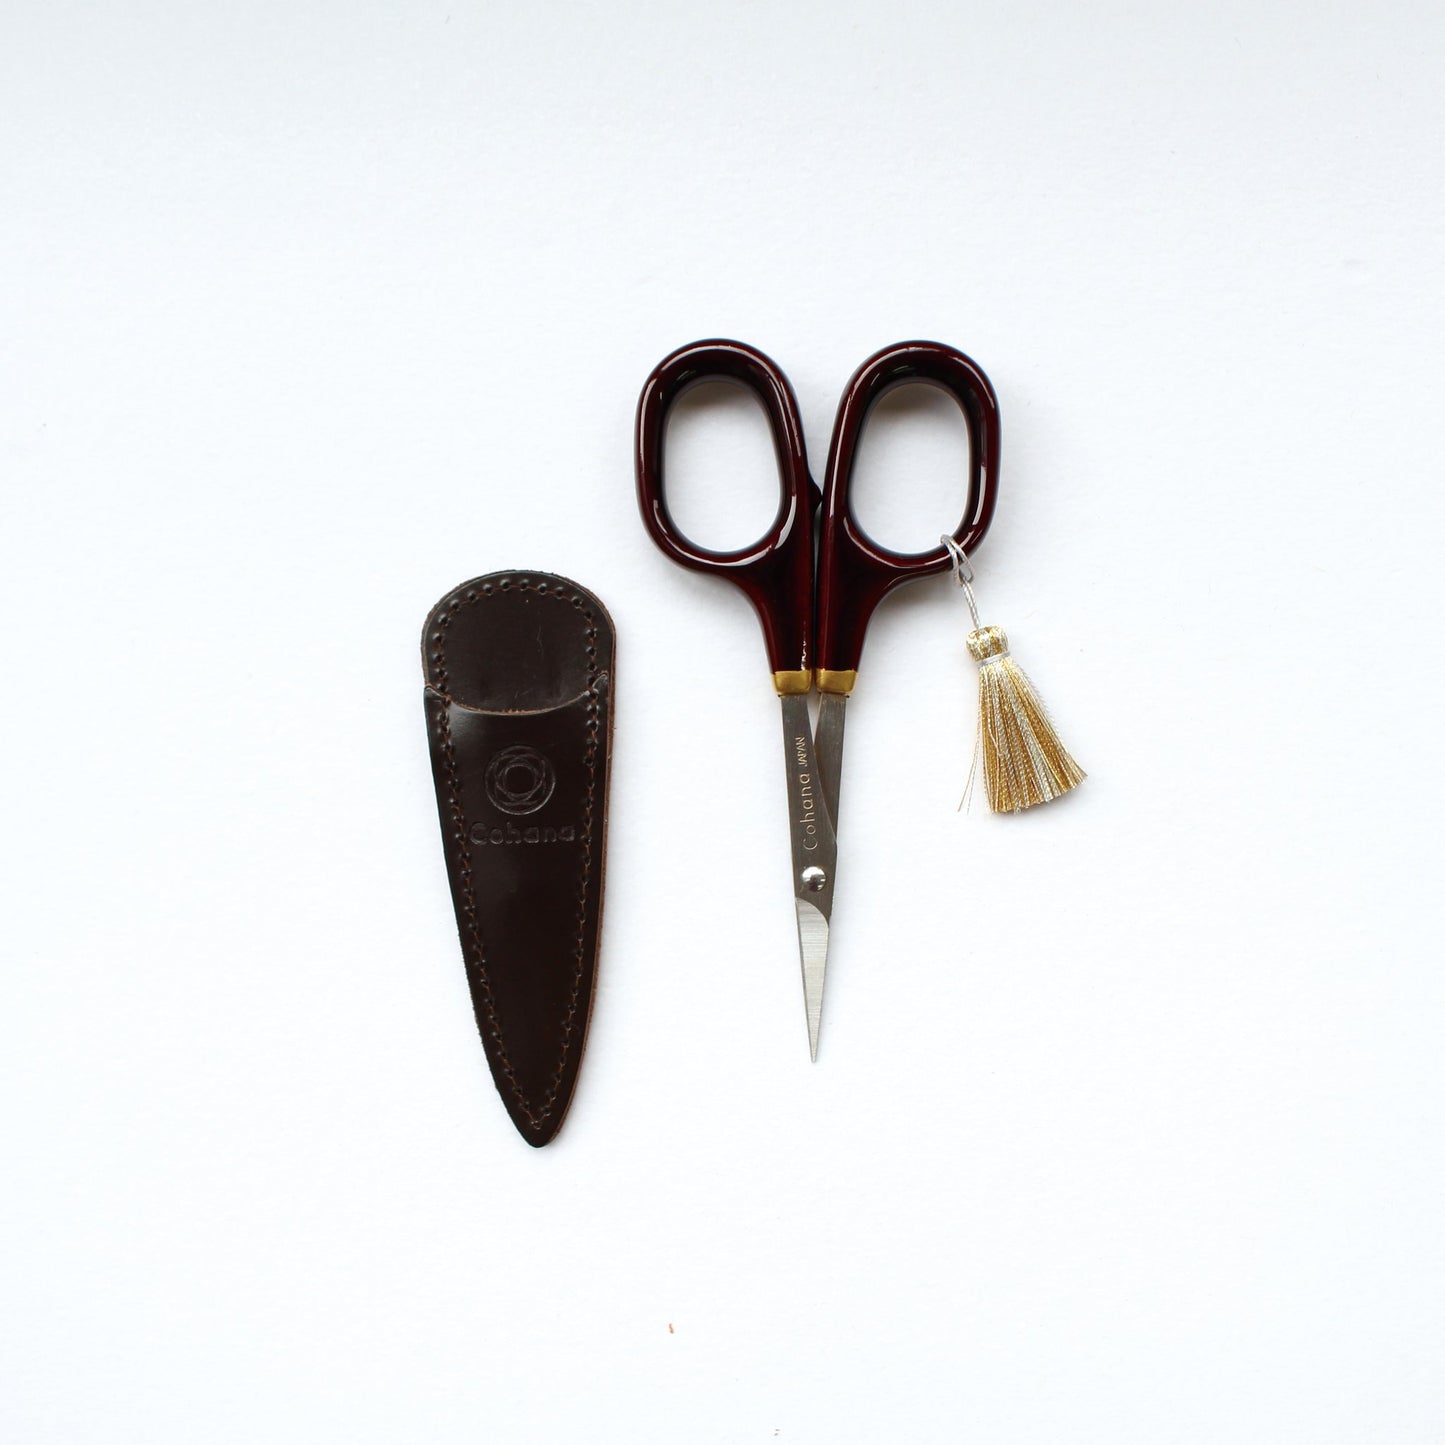 Cohana Small scissors with gold lacquer art